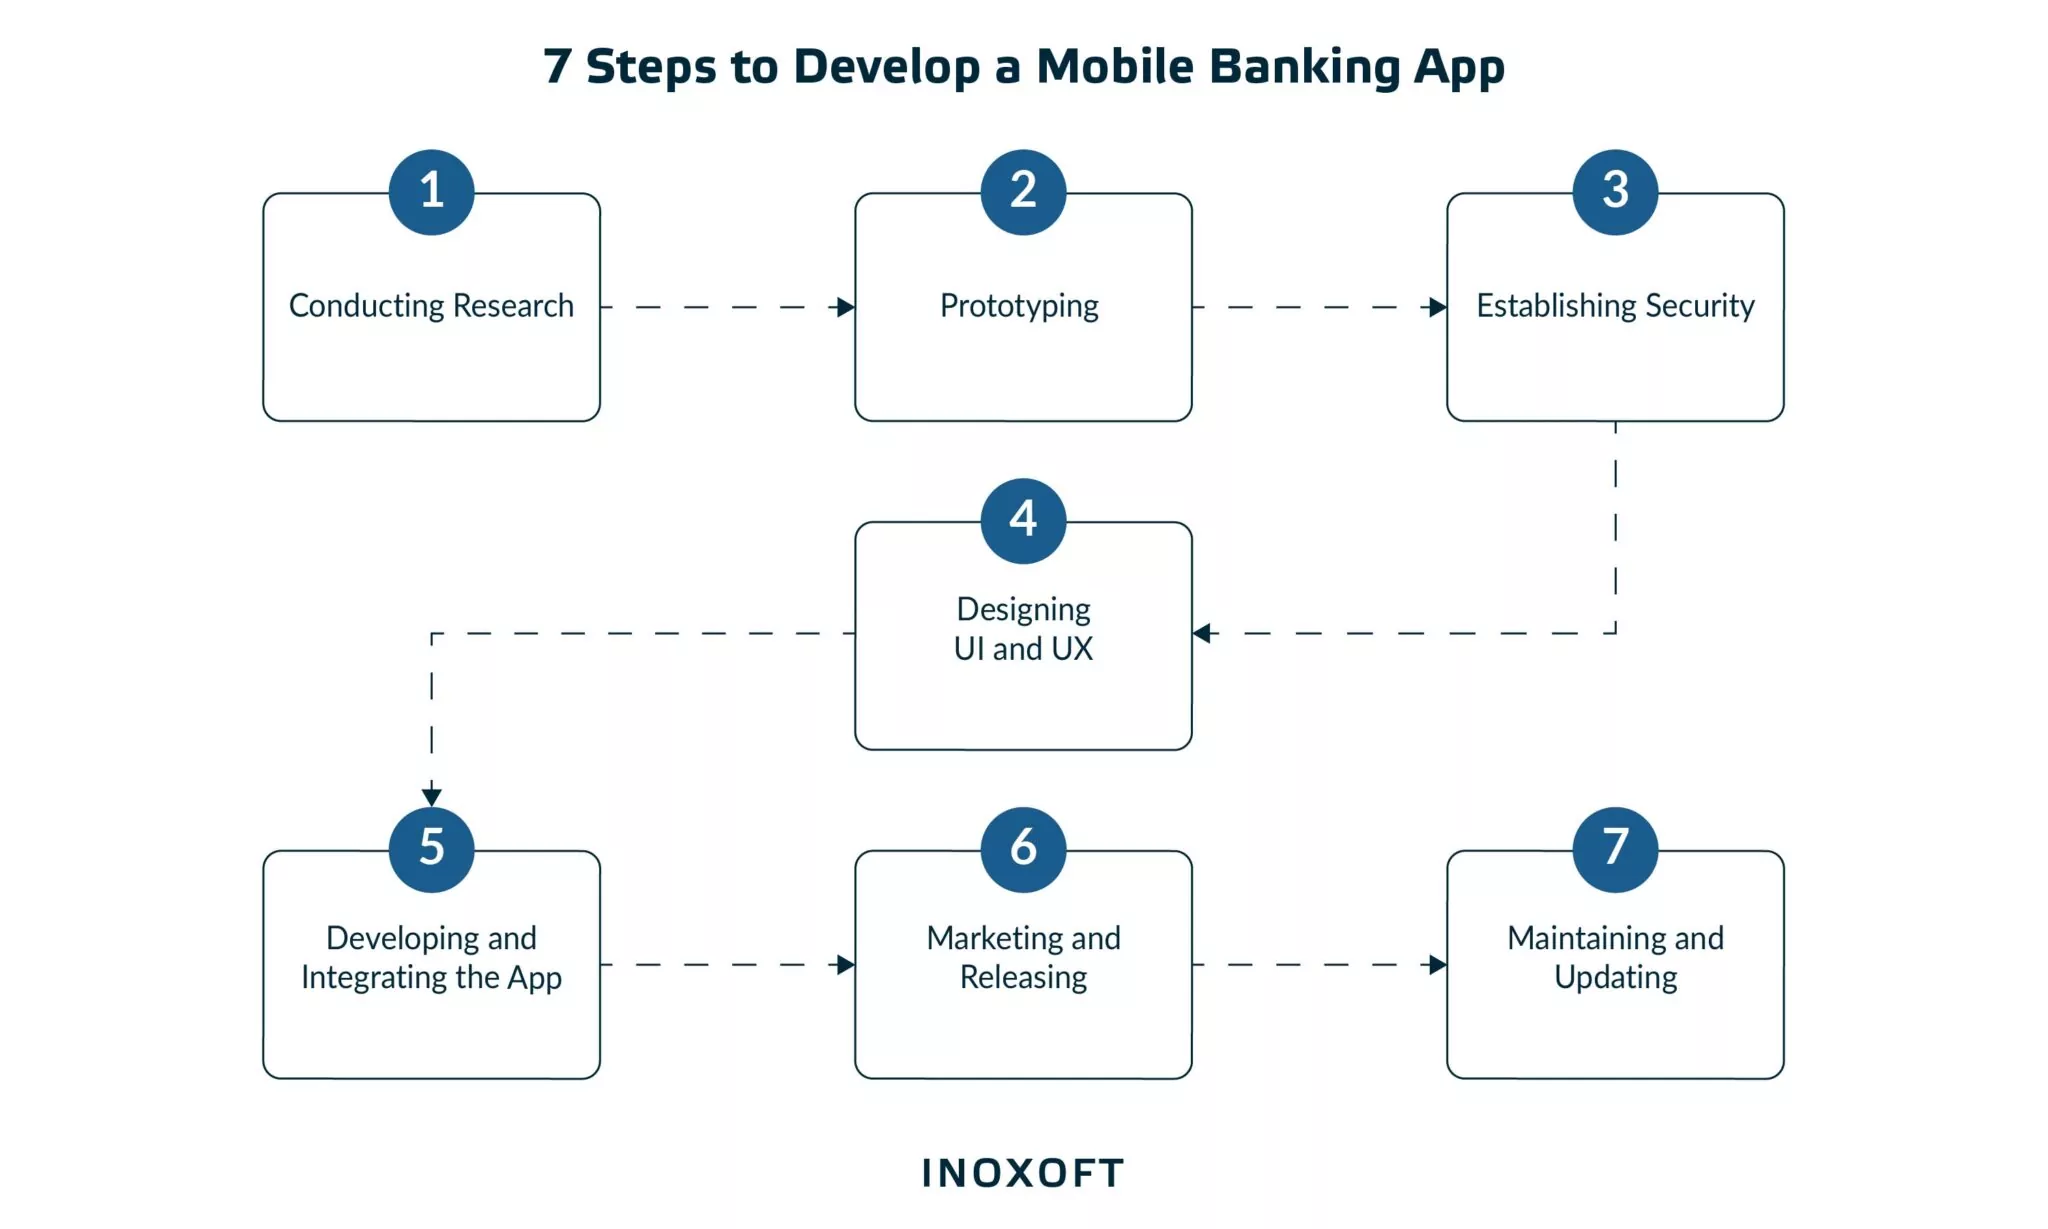 7 Steps to Develop a Mobile Banking App